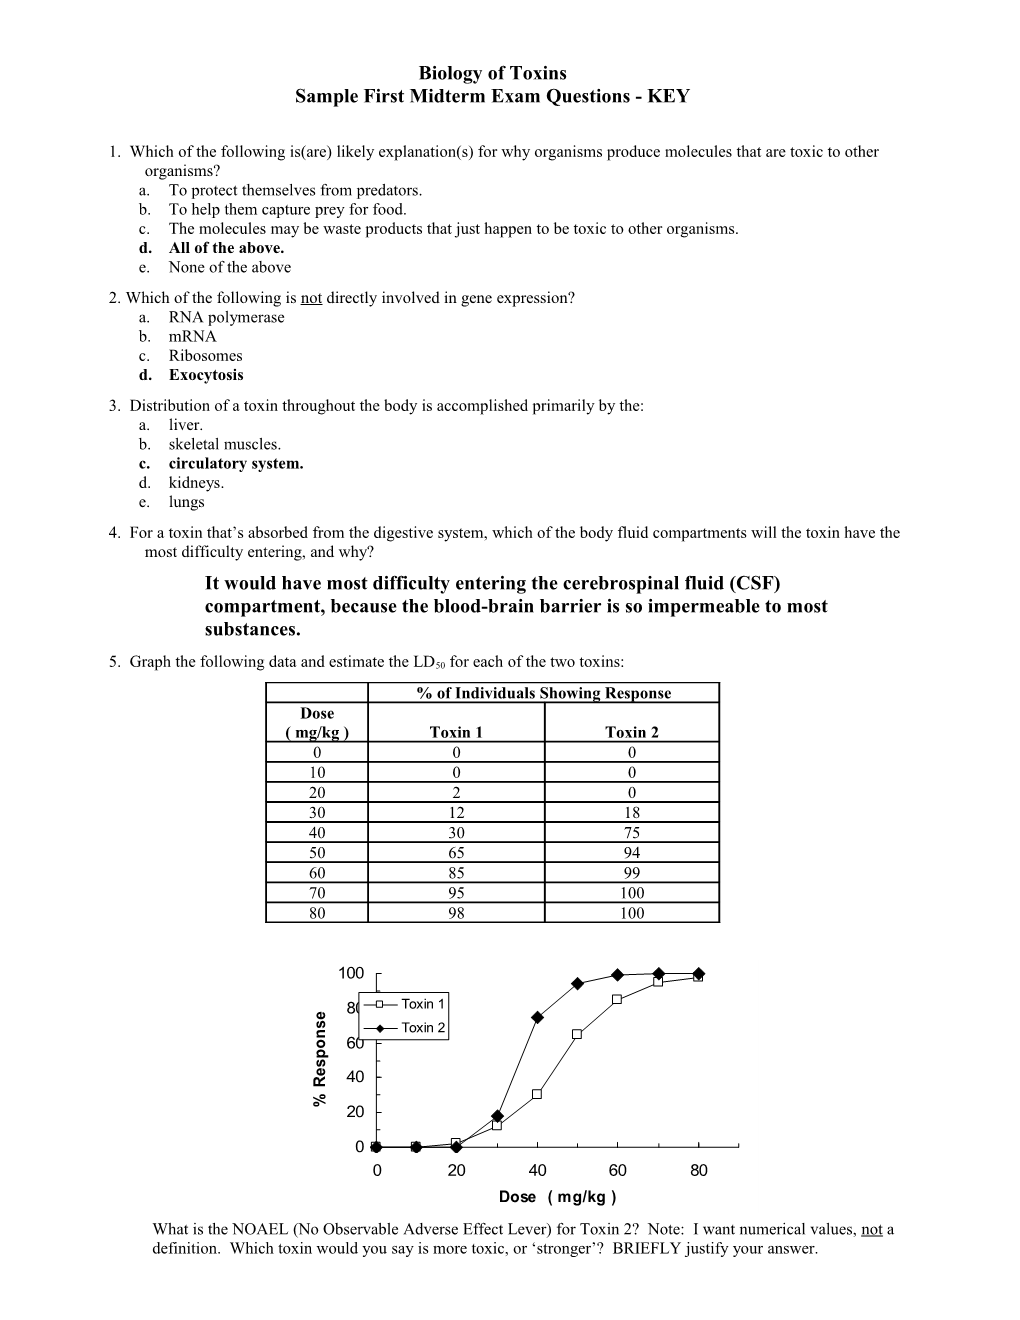 Sample First Midterm Exam Questions - KEY